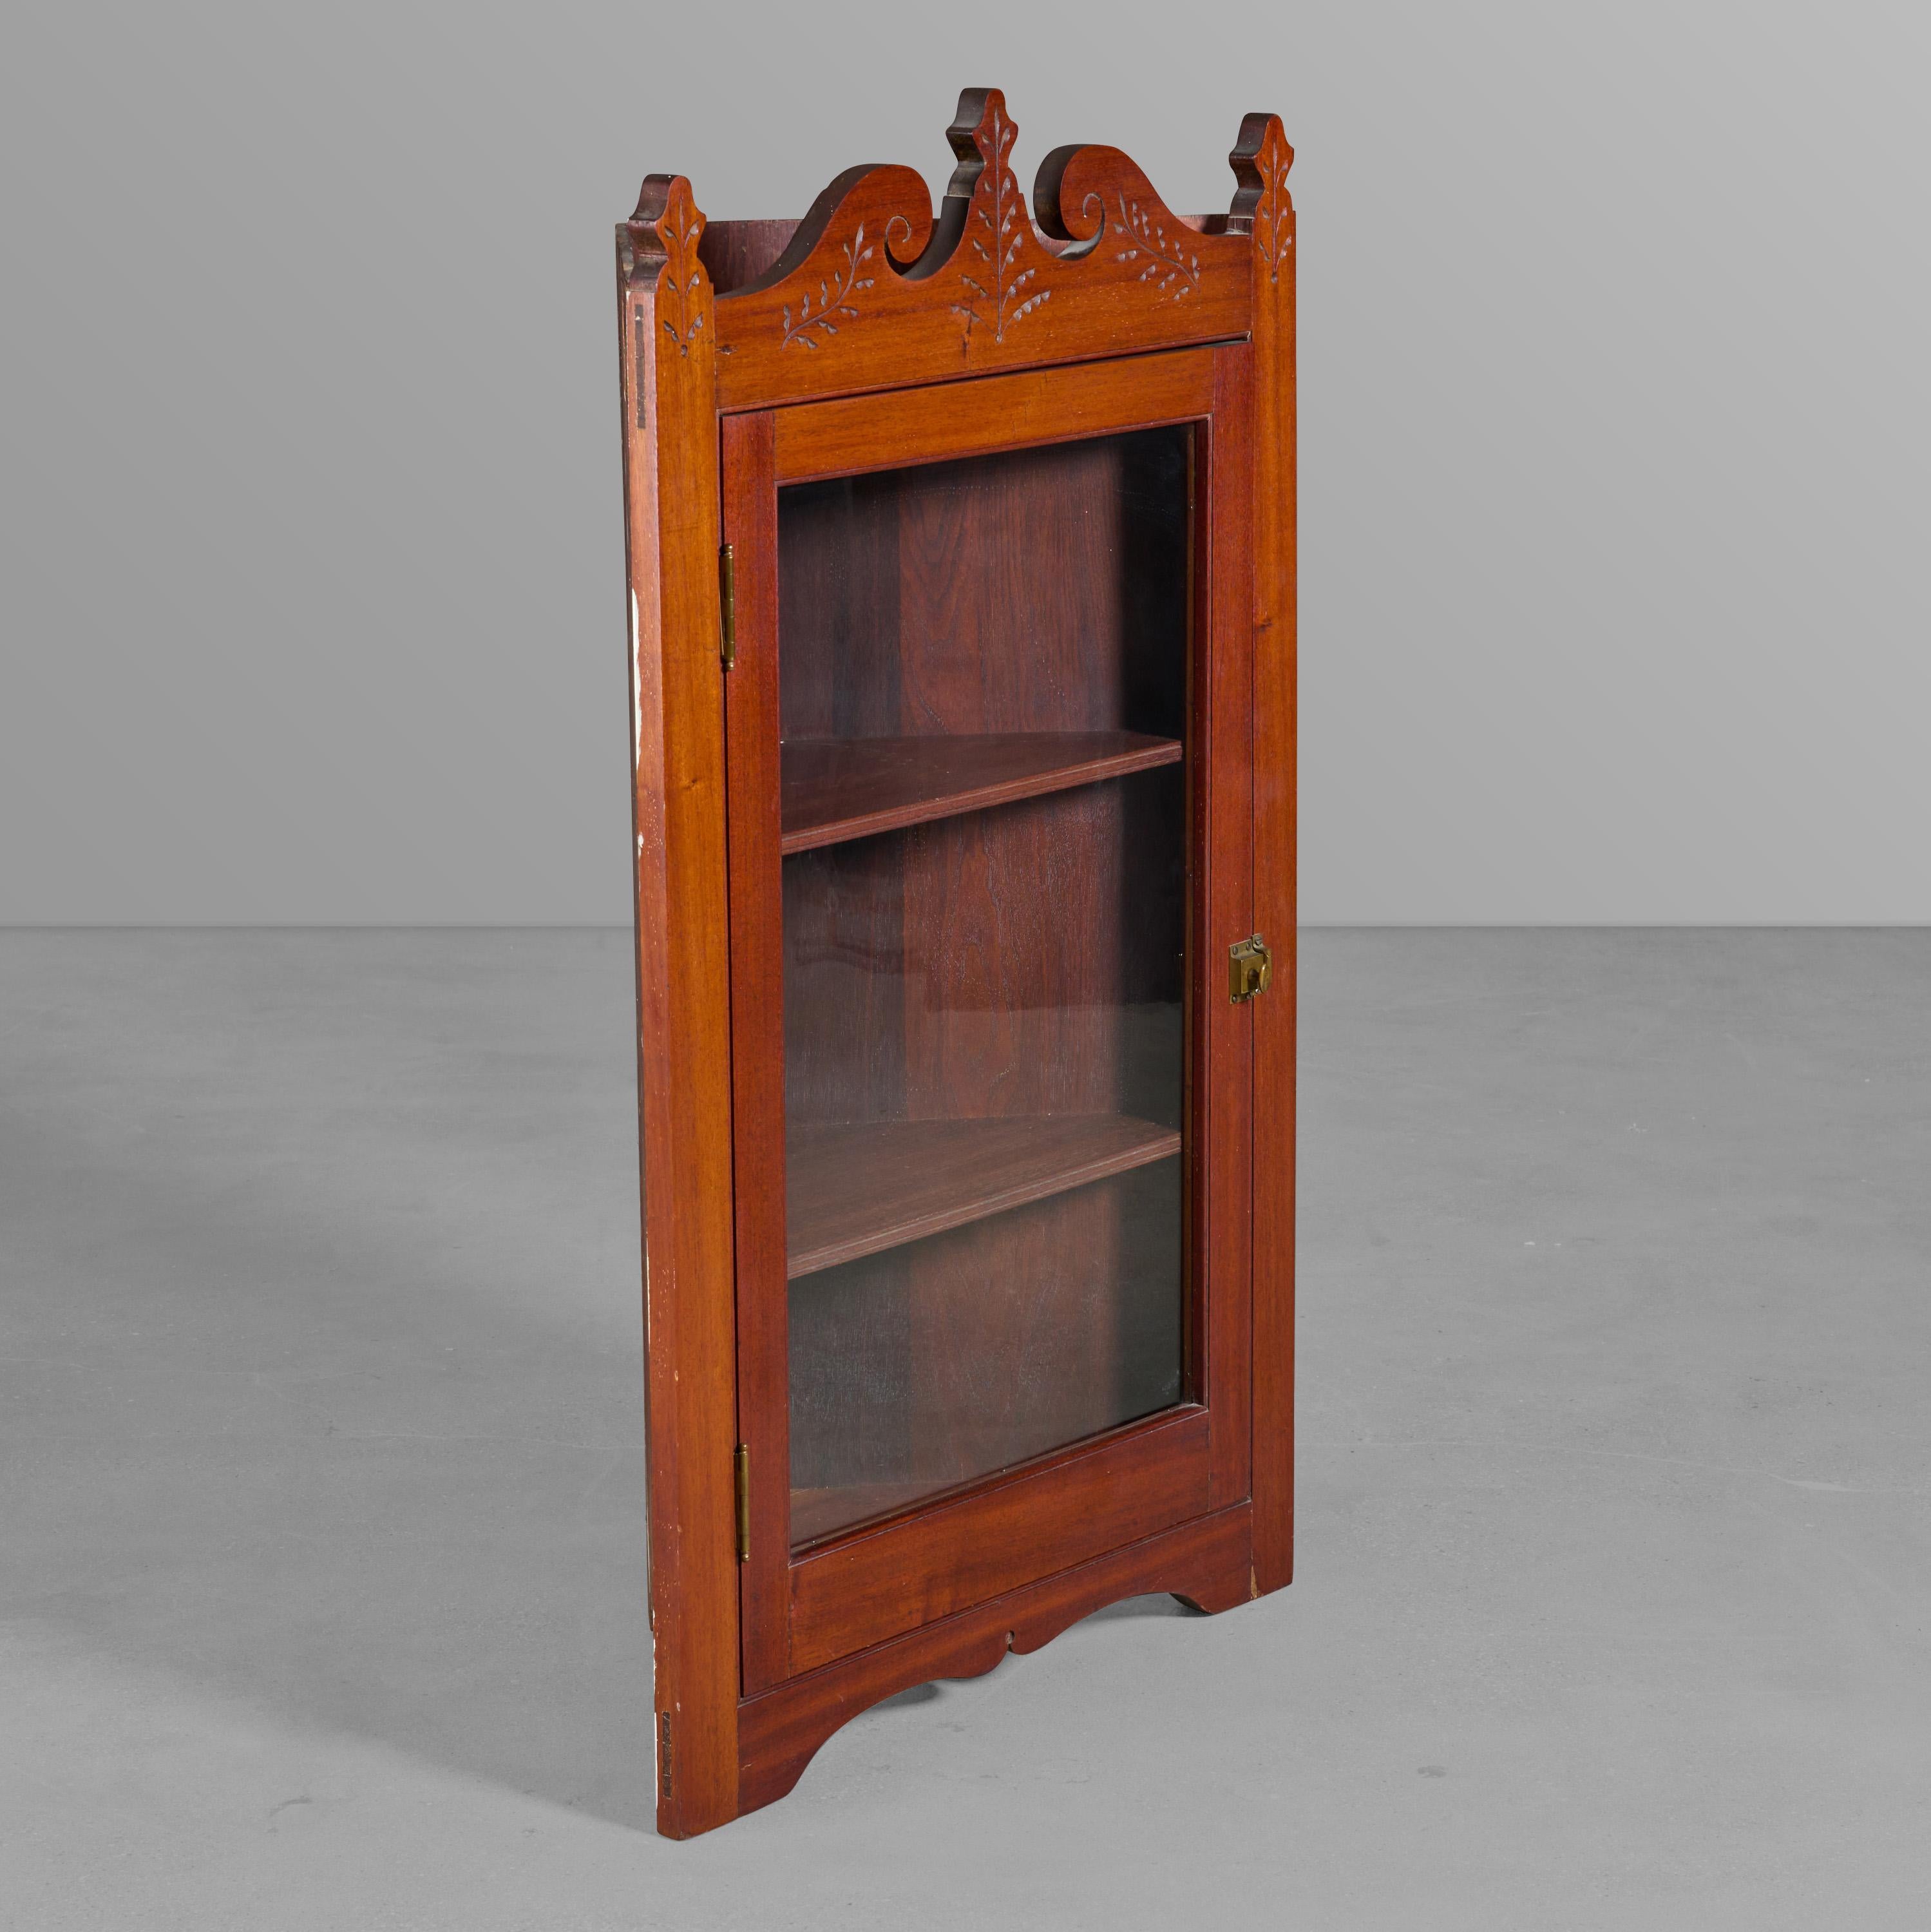 Early American corner cabinet with carved pediment.

